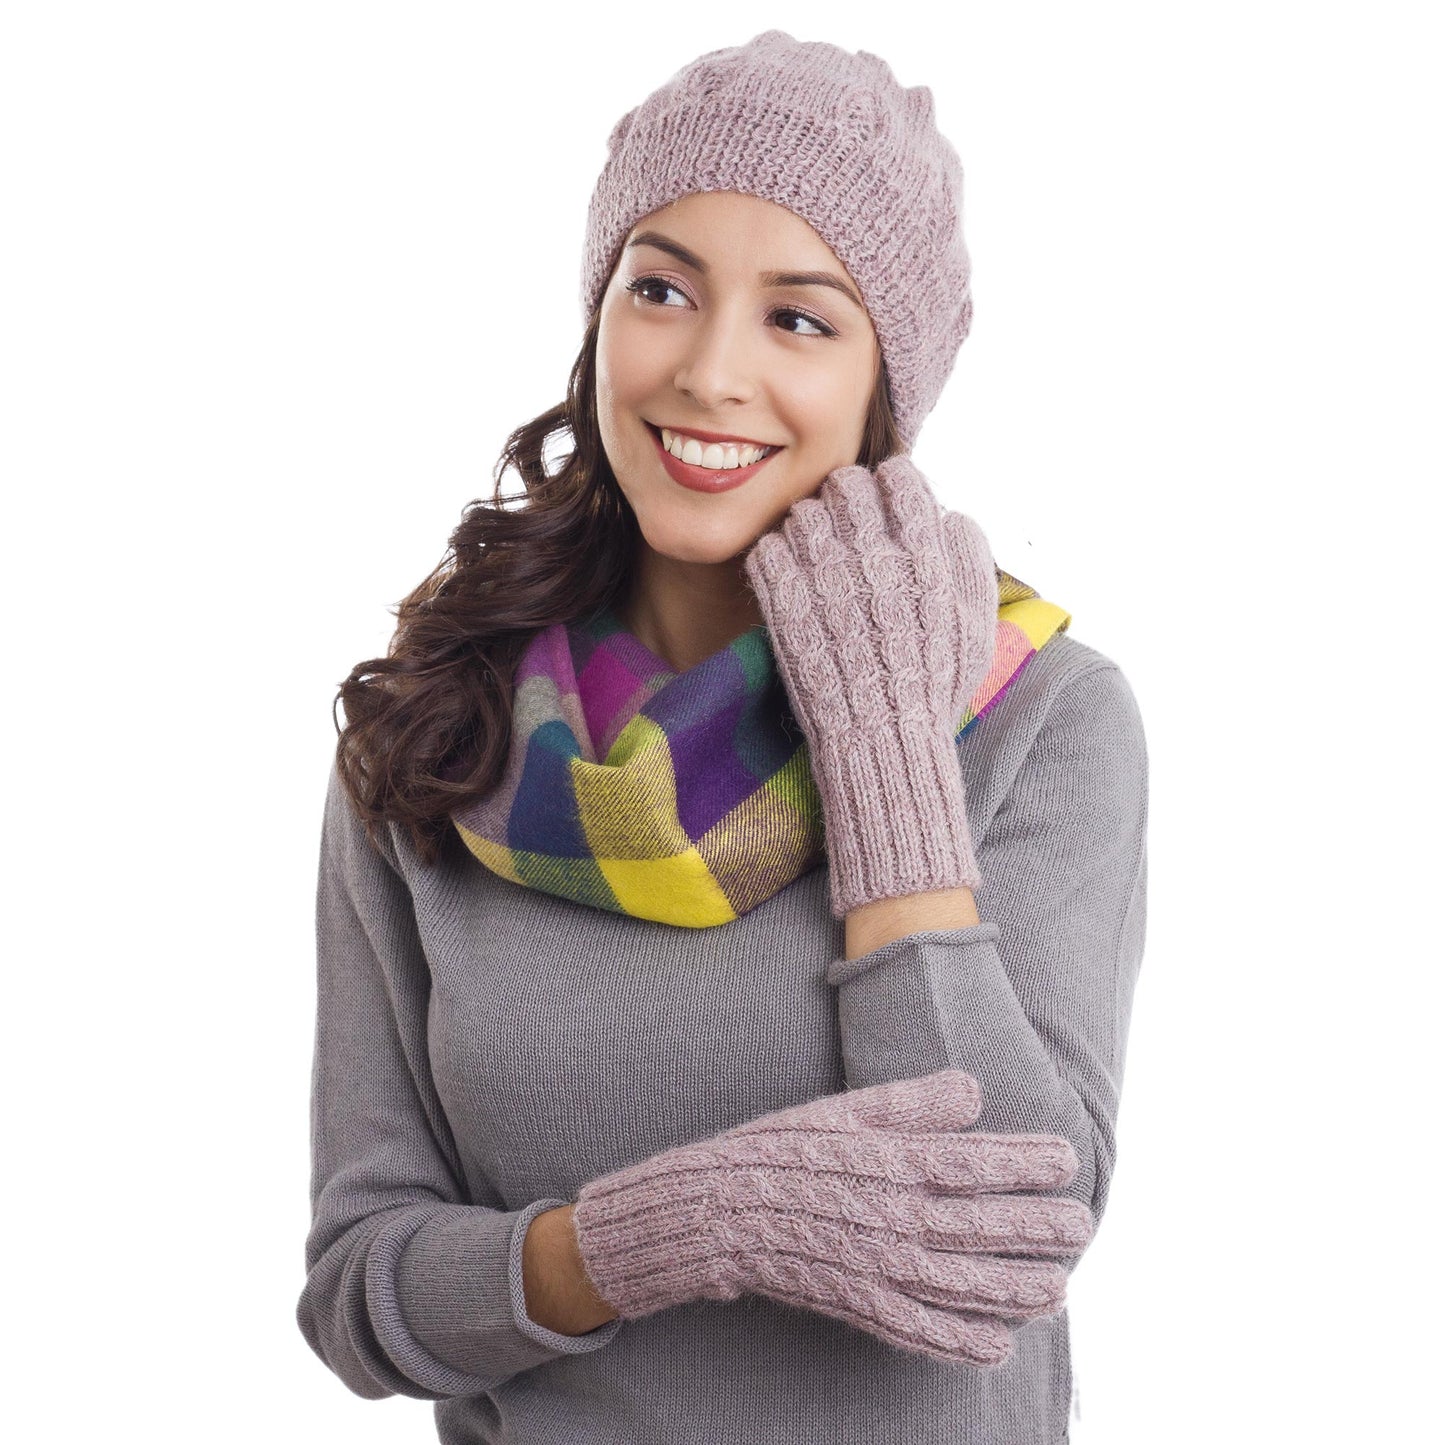 'Winter Delight in Light Mauve' Cable Knit 100% Alpaca Gloves from Peru